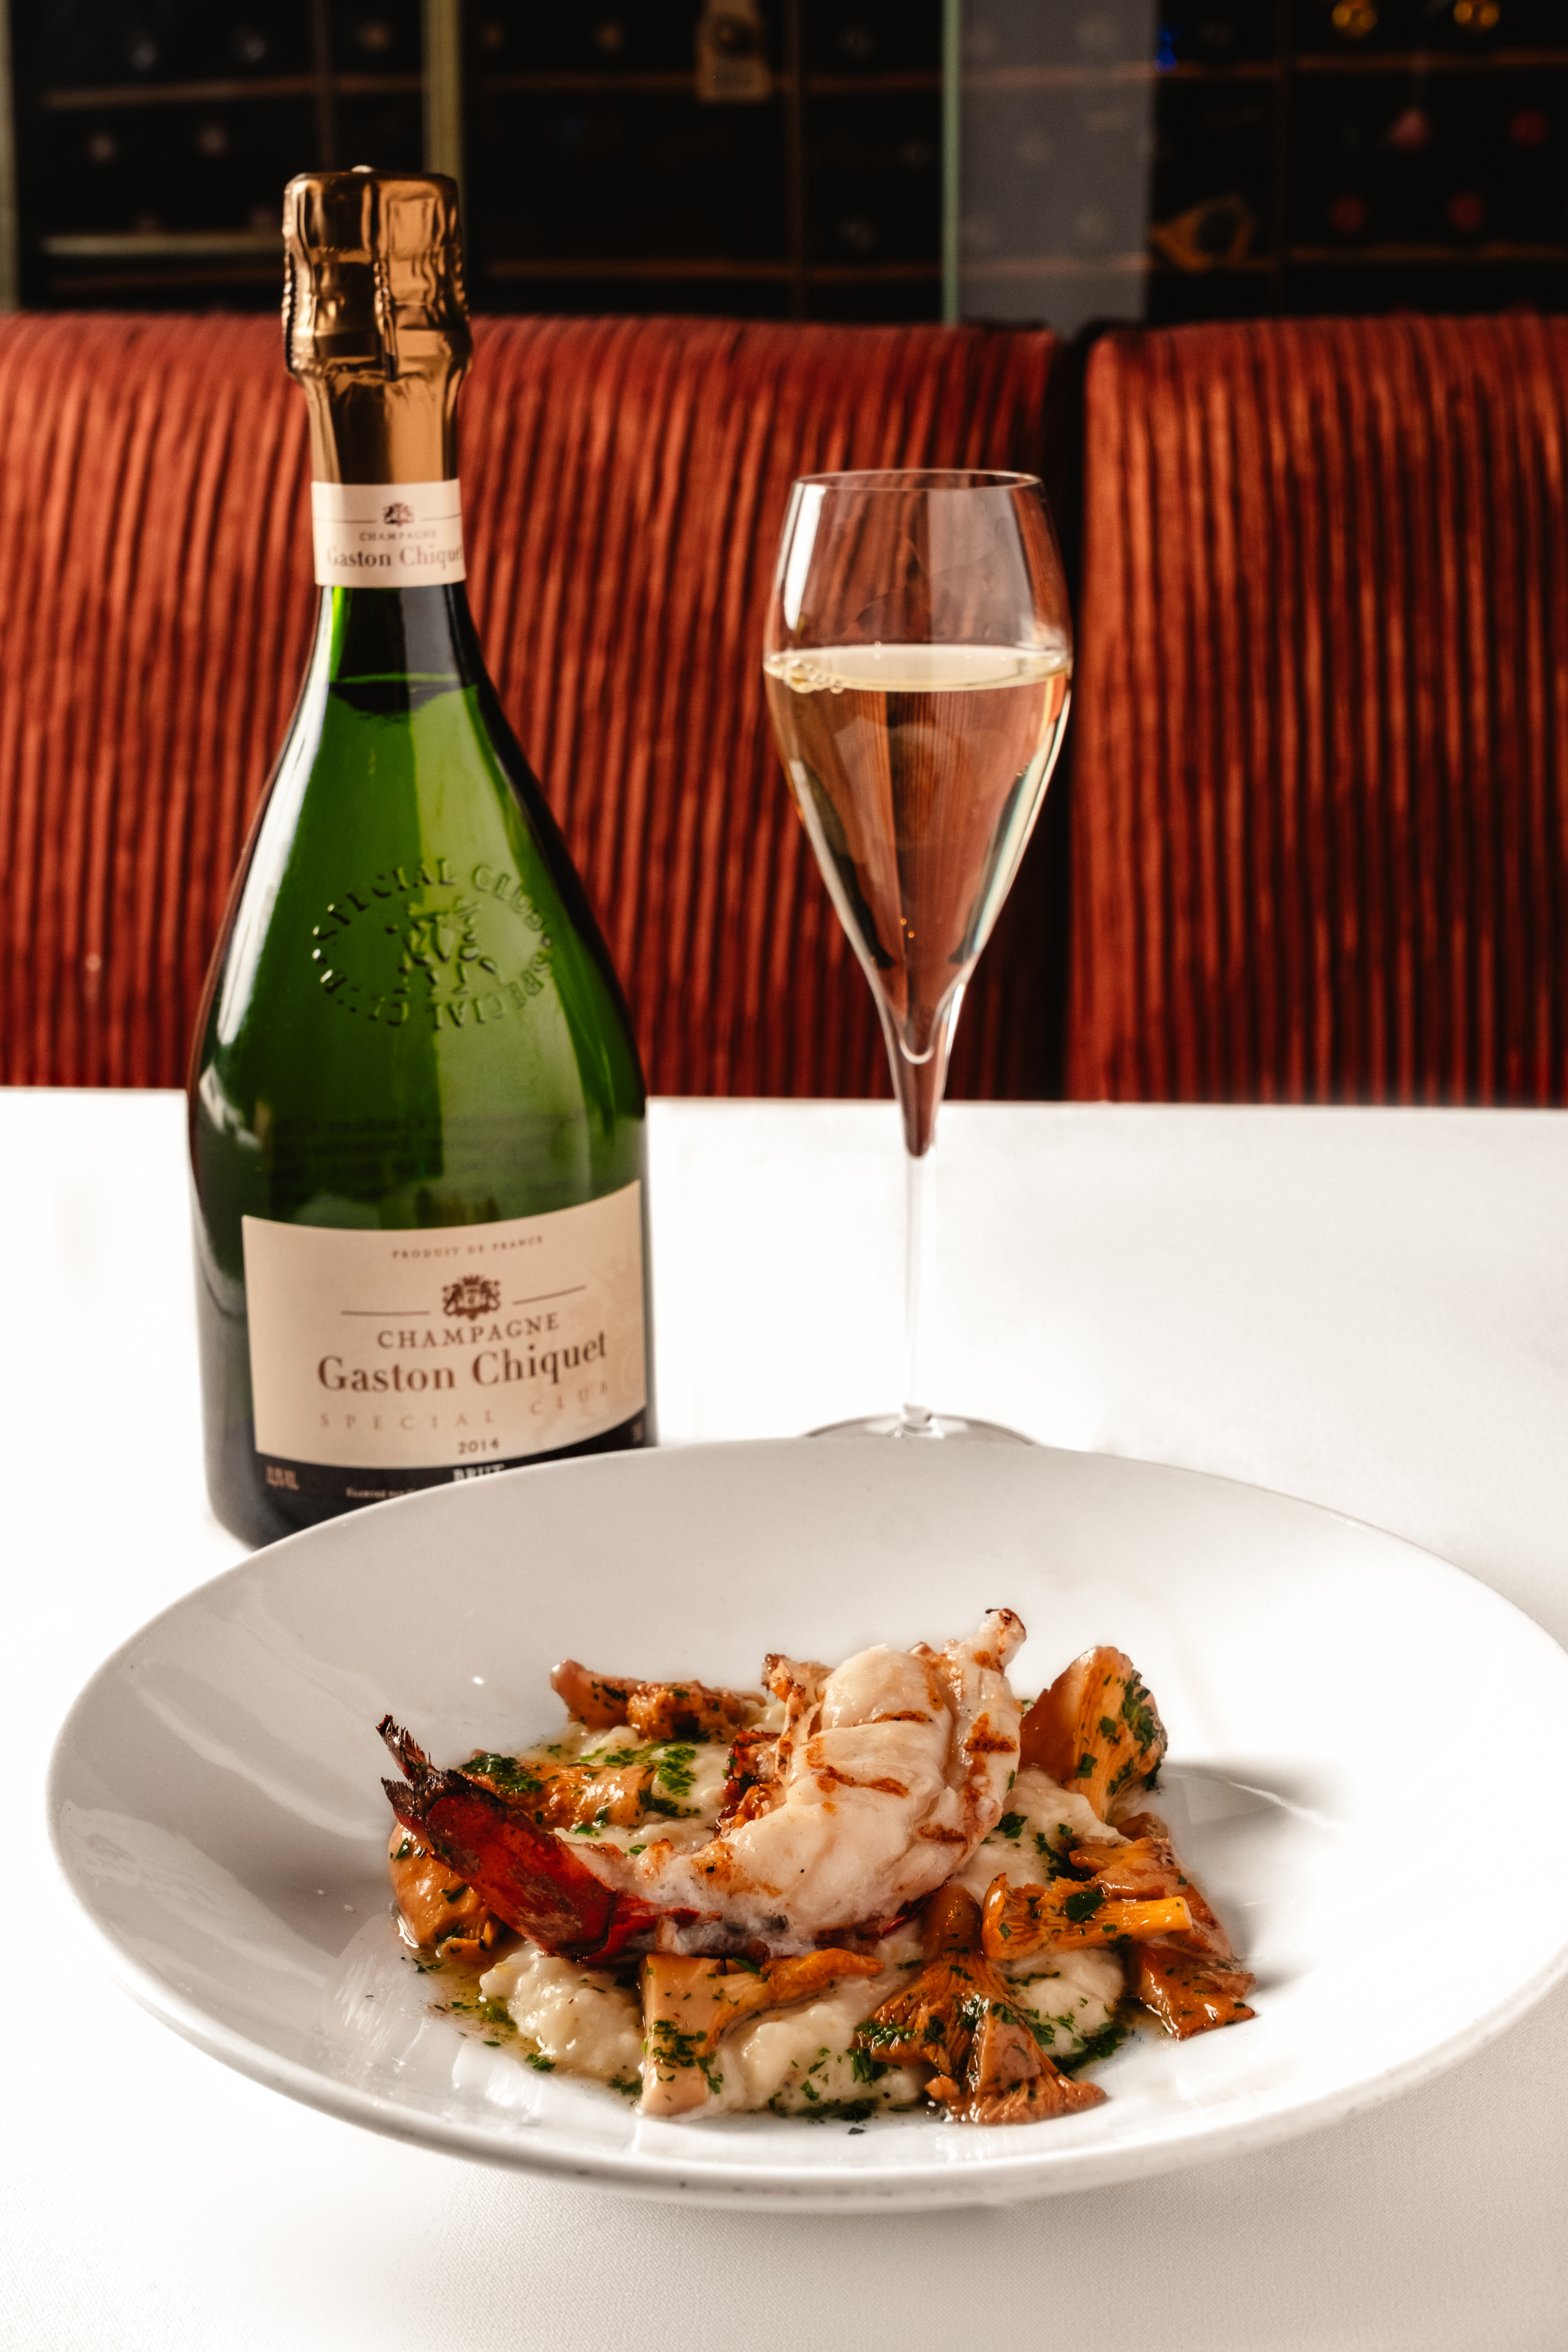 sparkling wine and seafood on a plate